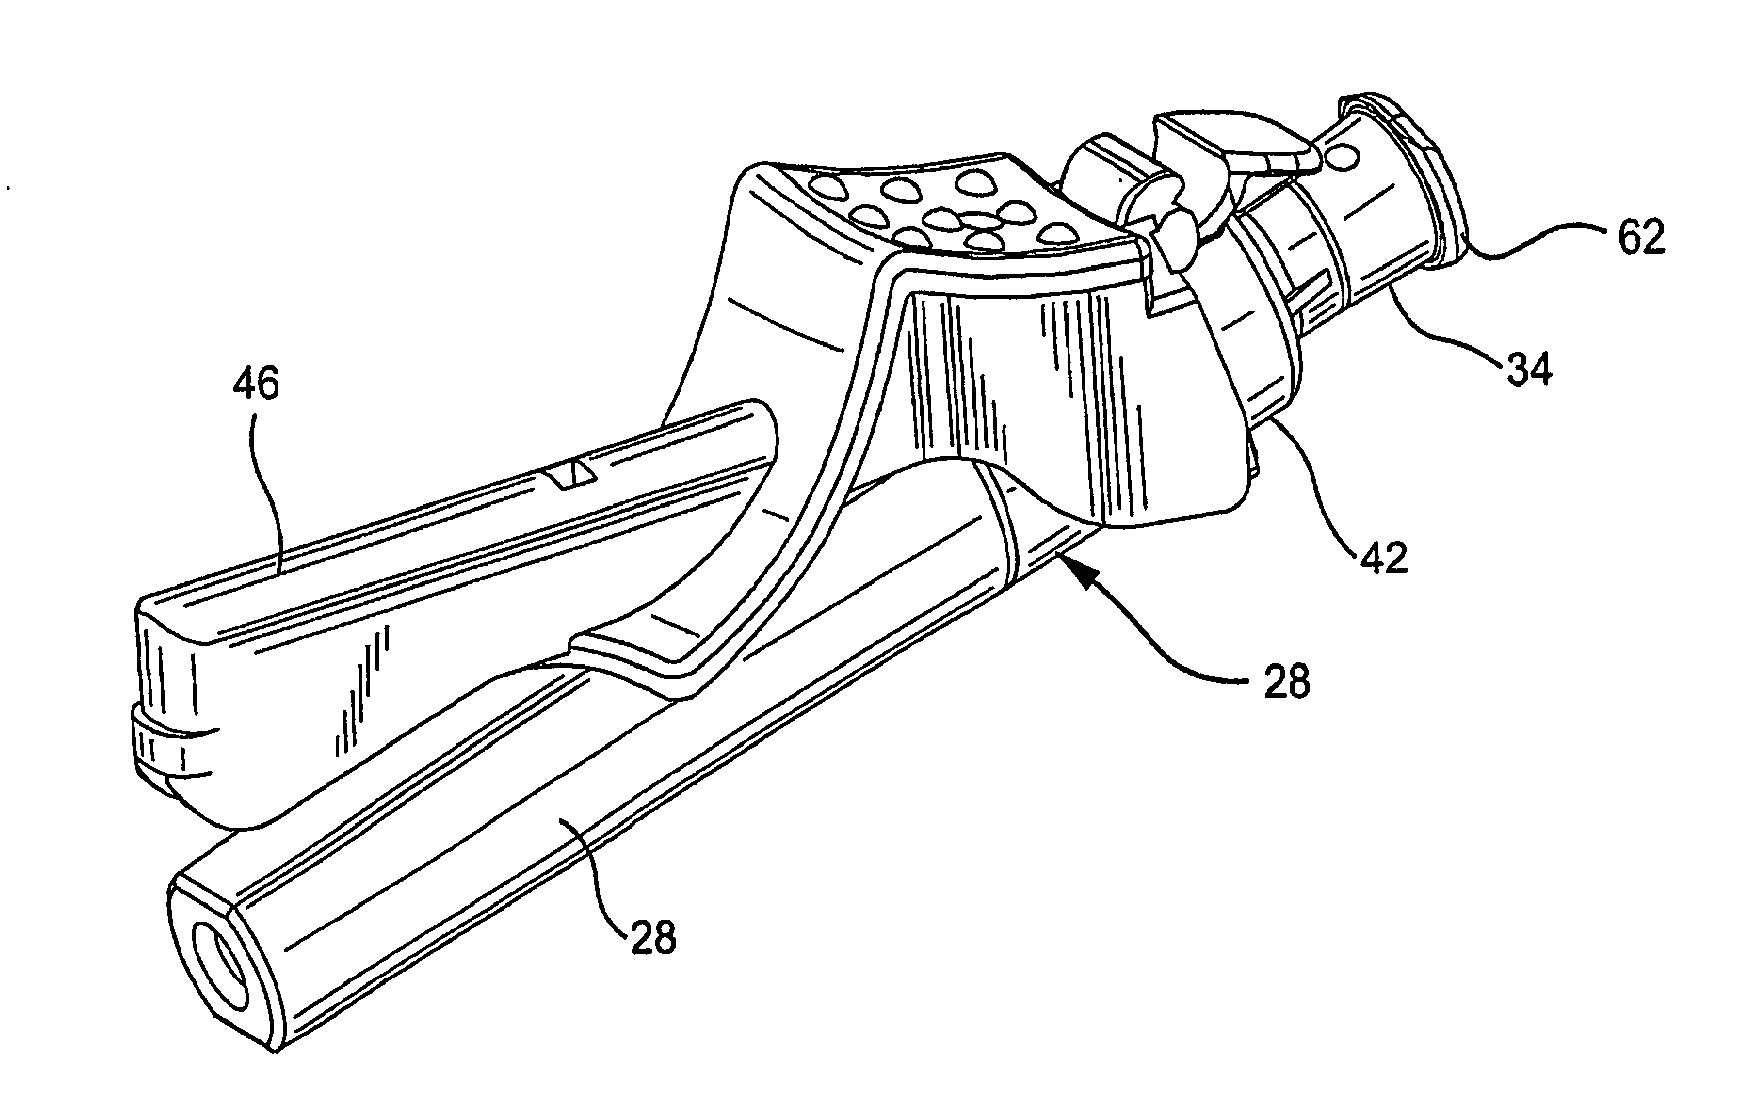 Luer connector assembly